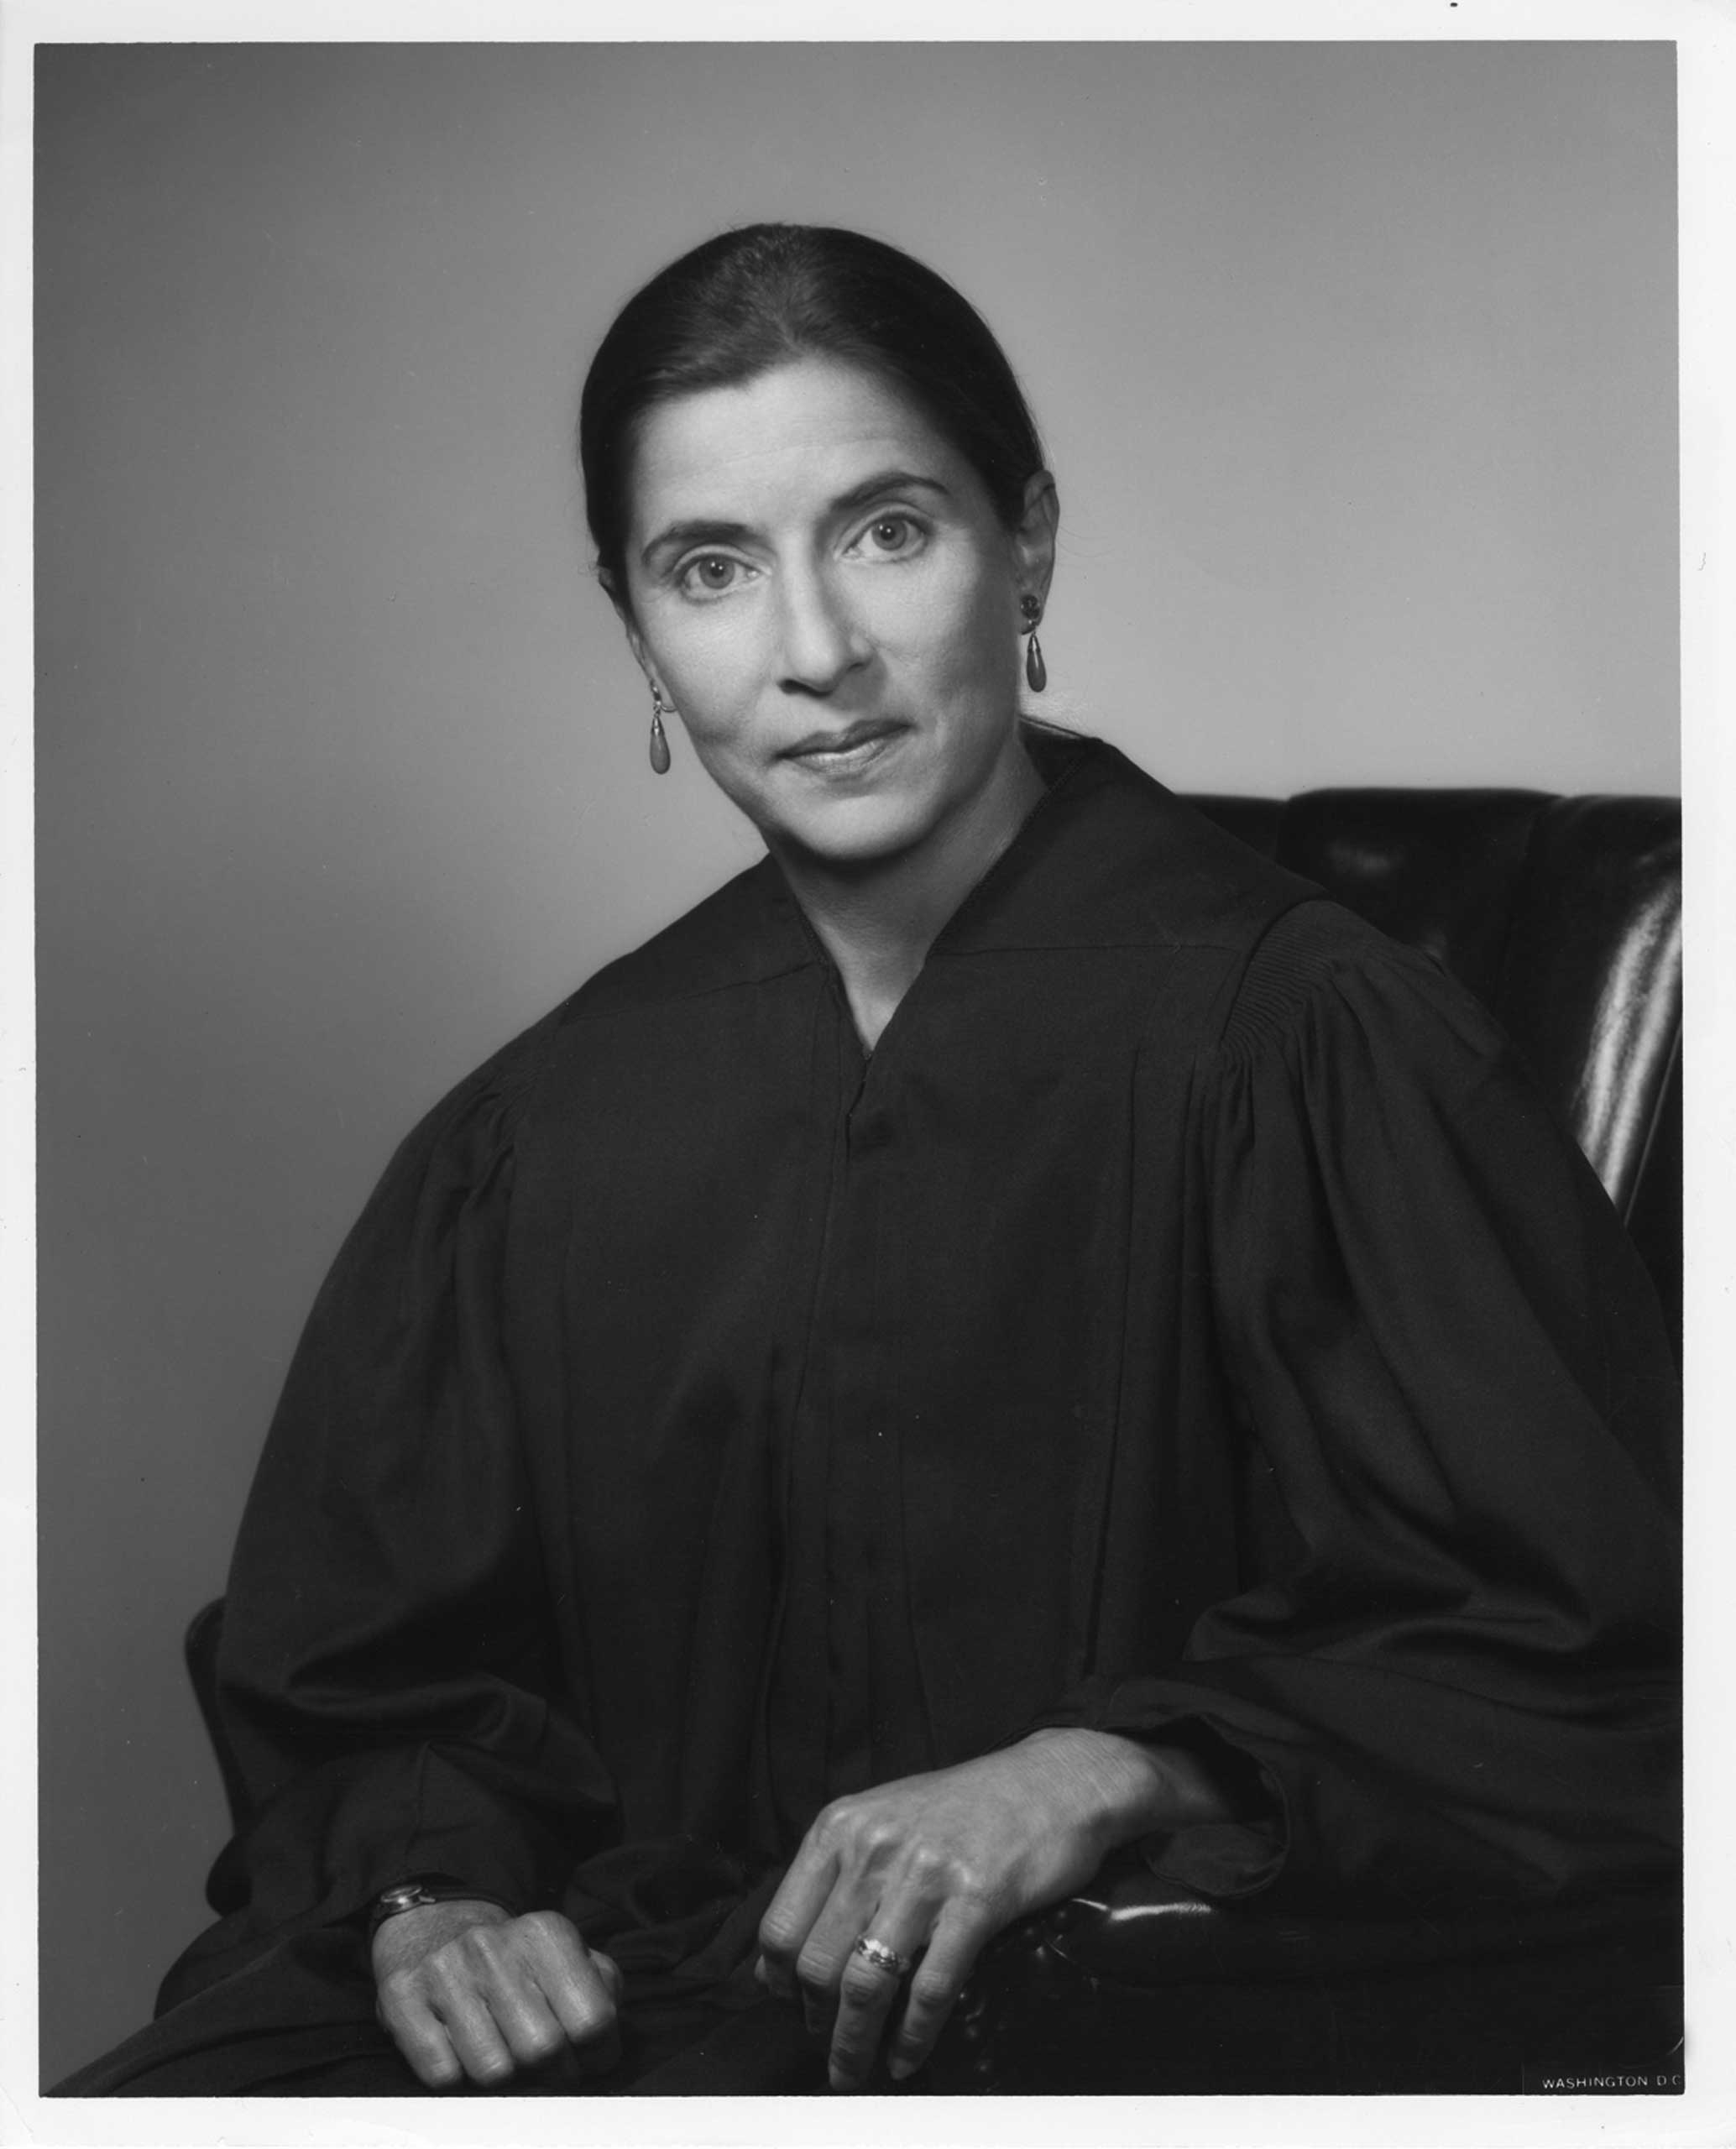 Fall 1980
                              Judge Ruth Bader Ginsburg during her first term as a United States Circuit Judge to the U.S. Court of Appeals for the District of Columbia.